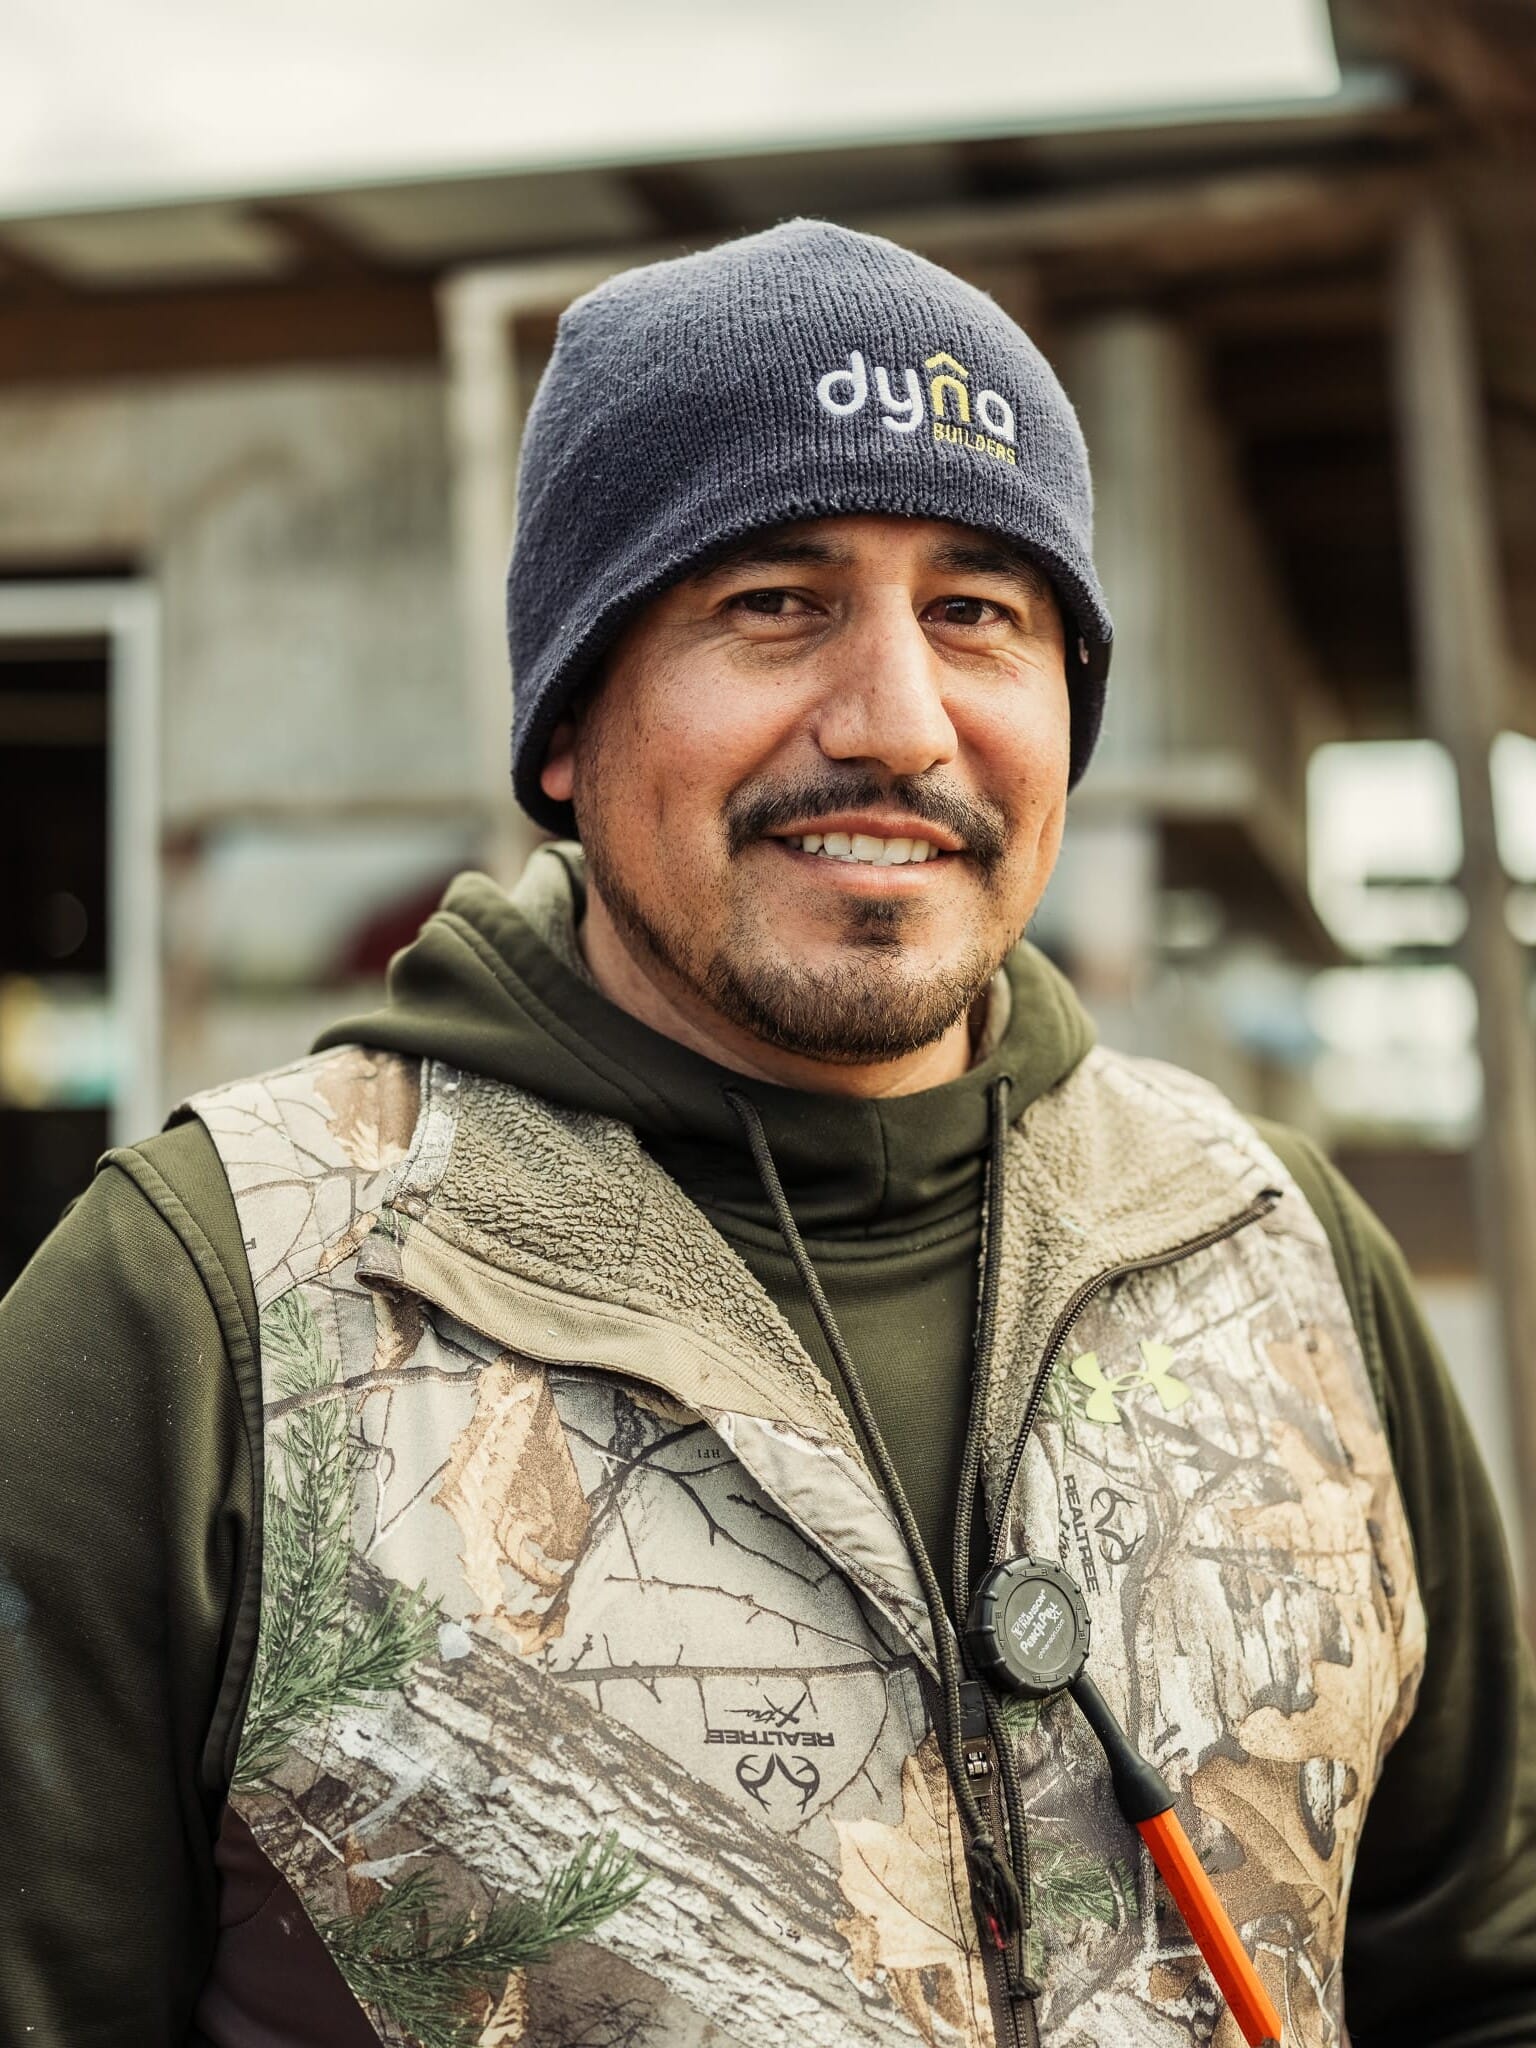 Abel Guzman, a man wearing a camouflage vest and hat, works as a carpenter for Dyna Builders.